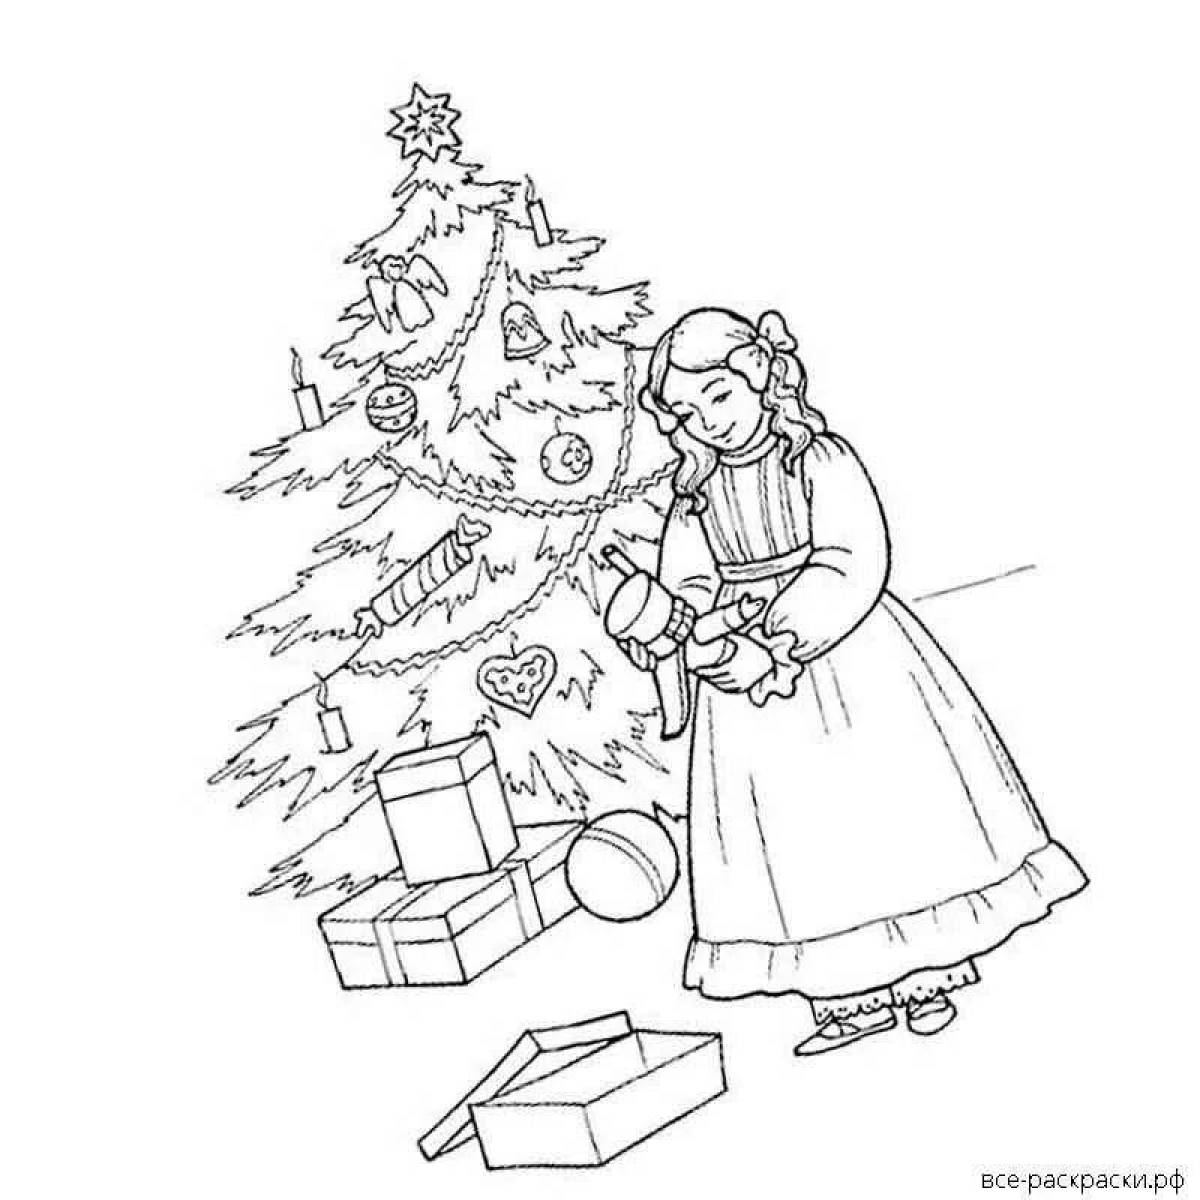 Bright Nutcracker and Mouse King coloring book